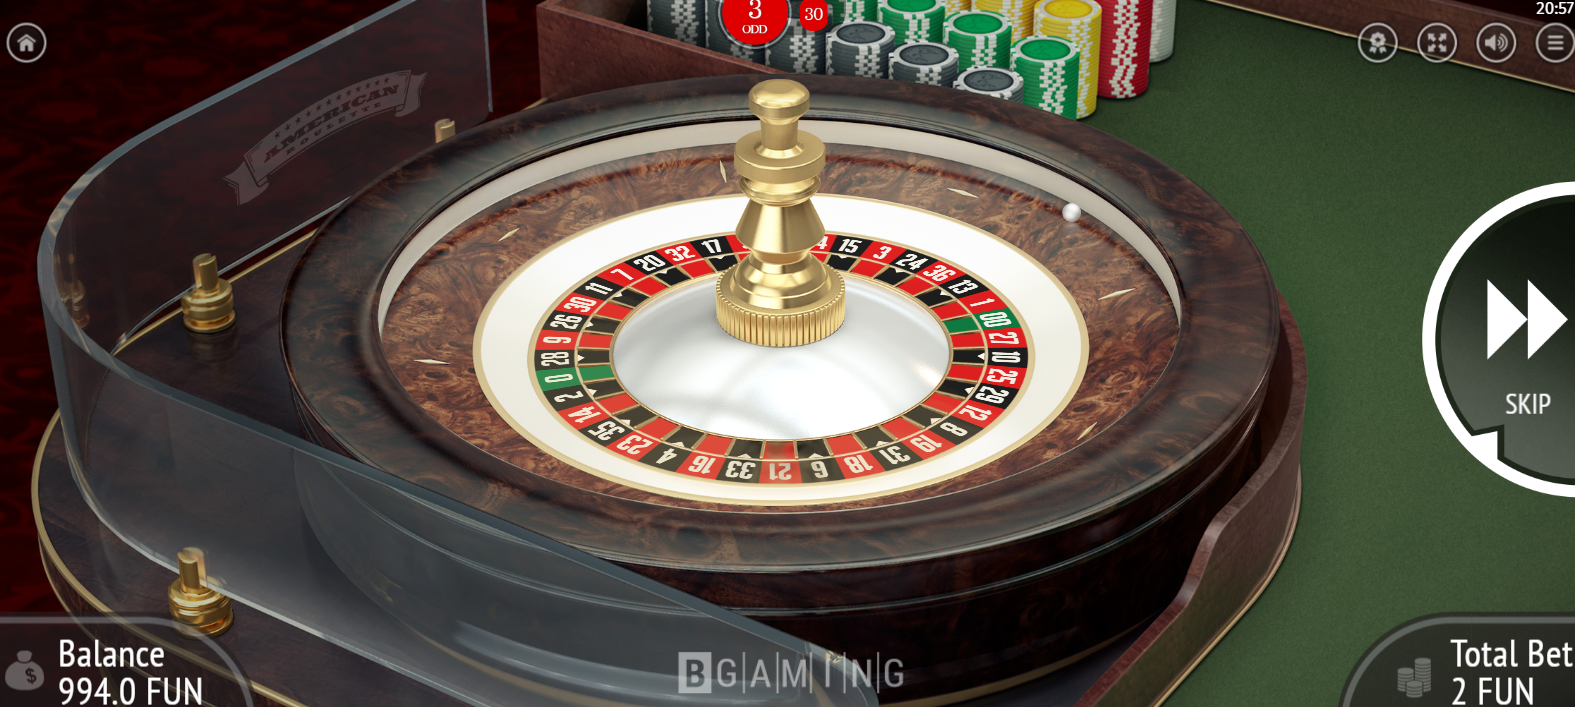 BGaming American Roulette Online Casino Wheel Layout